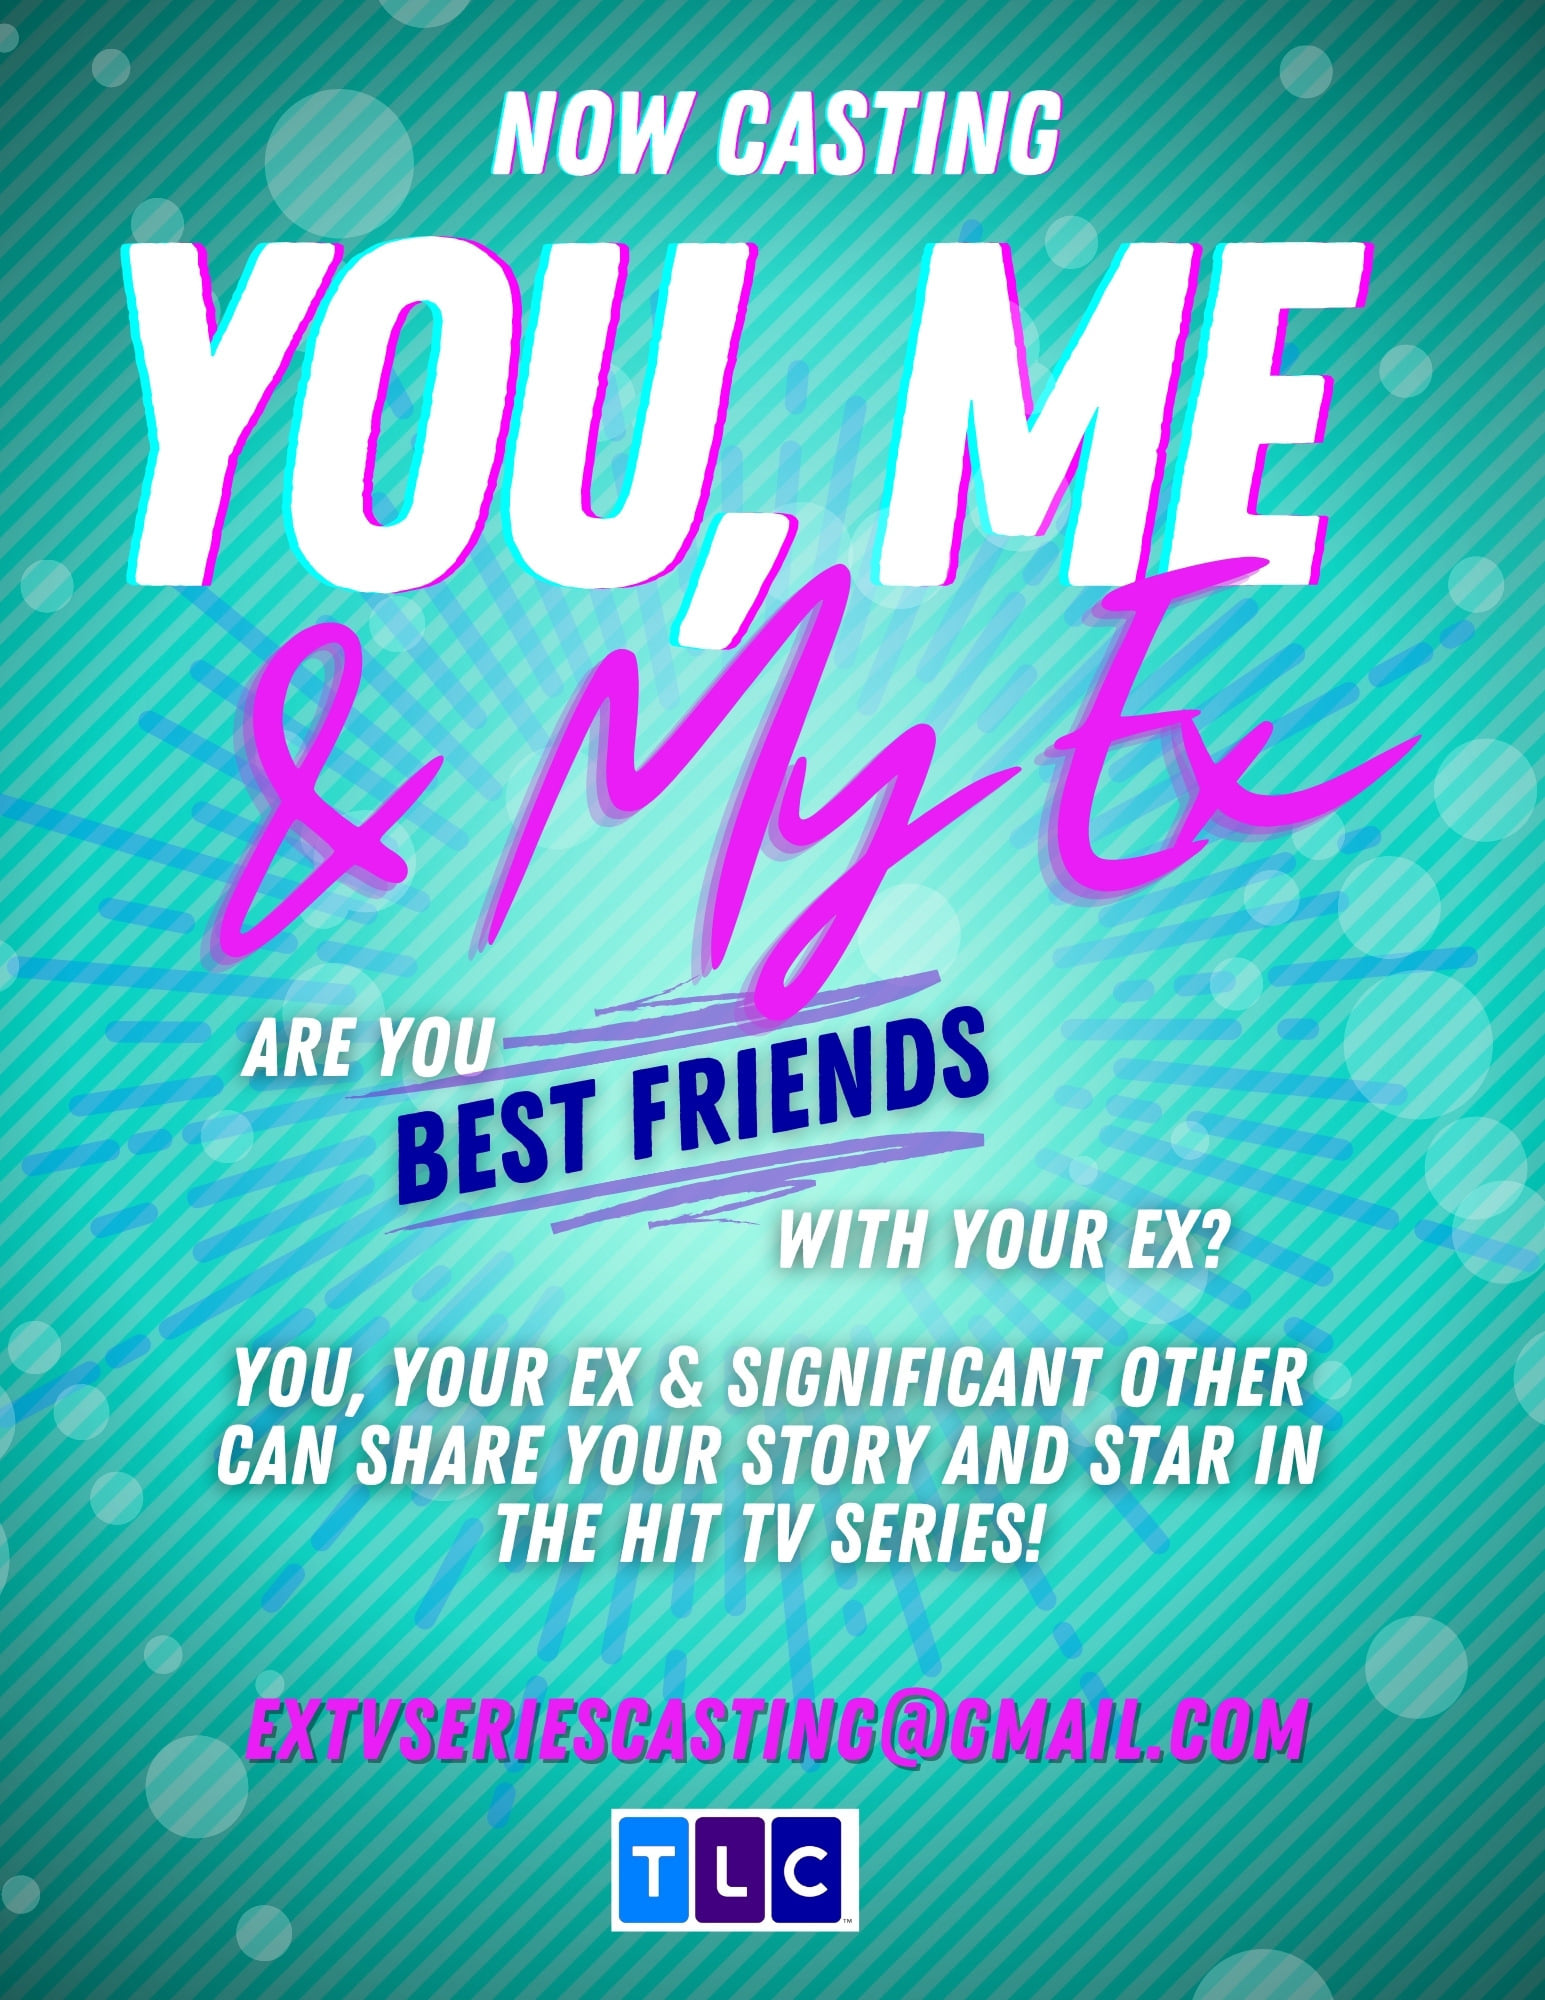 Casting “You, Me and My EX” Auditions Free